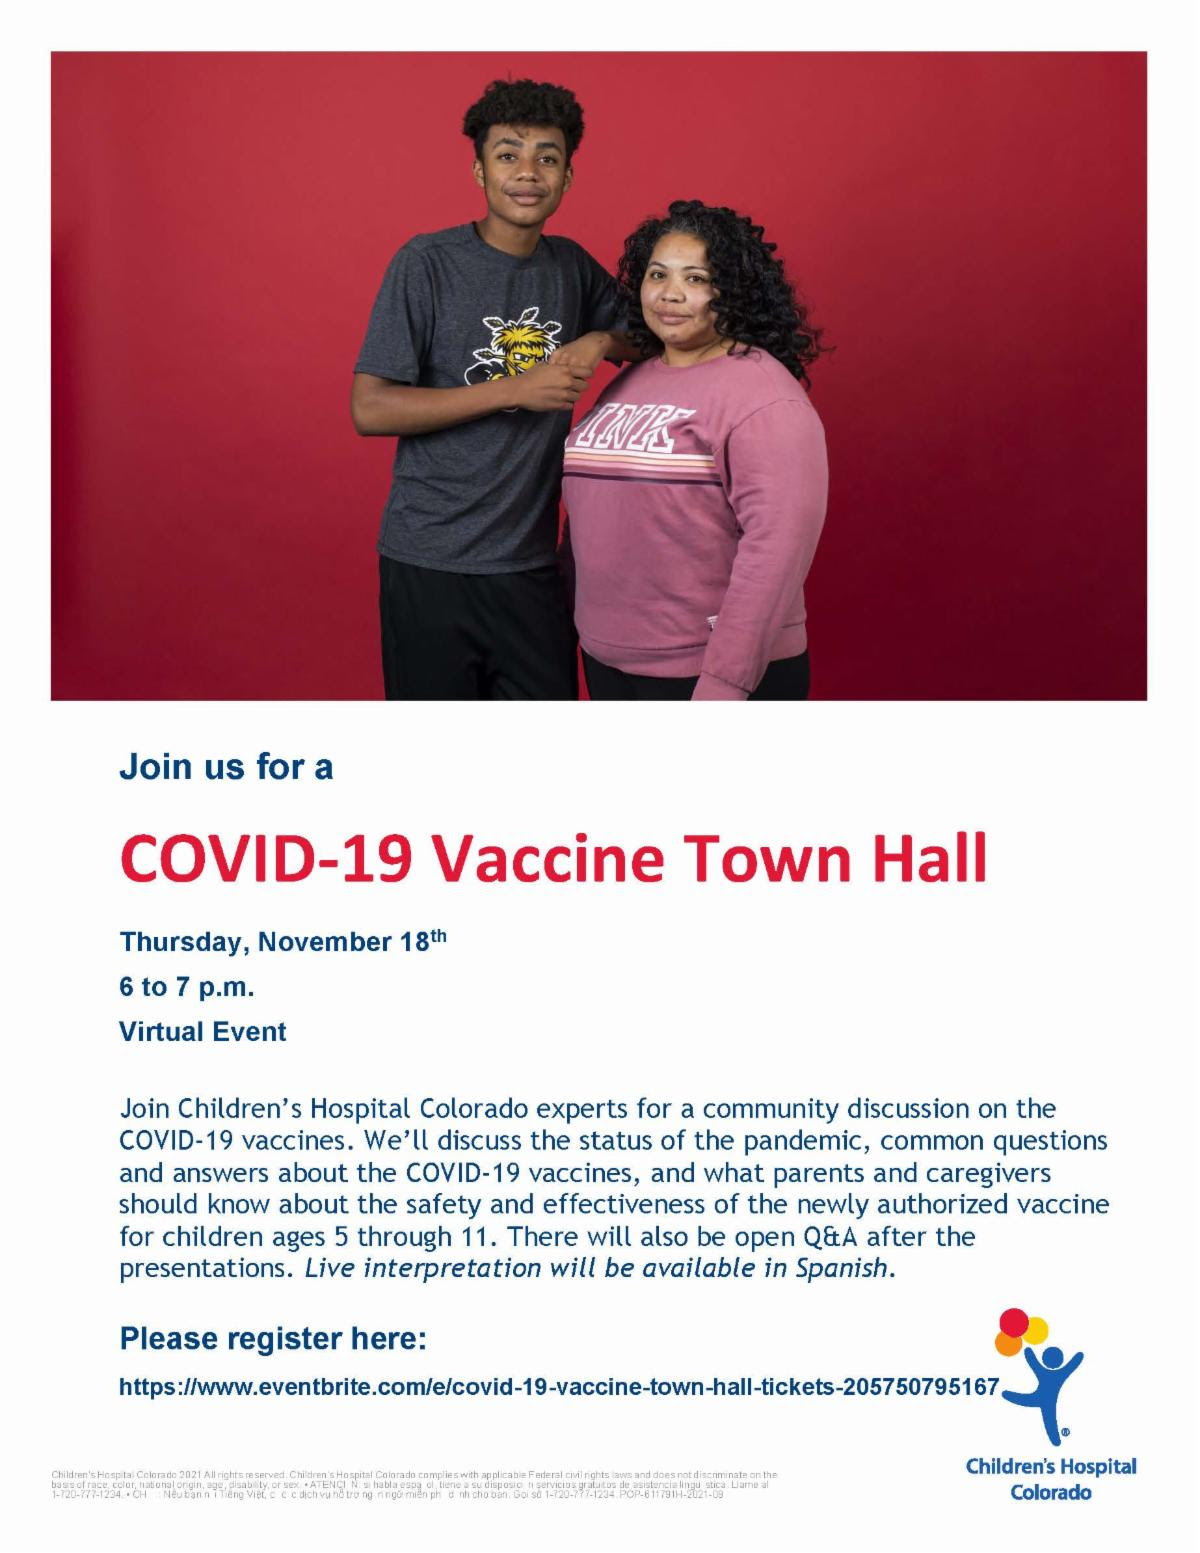 COVID -19 Vaccine Town Hall virtual meeting on Nov 18 from 6-7pm by The Children's Hospital 